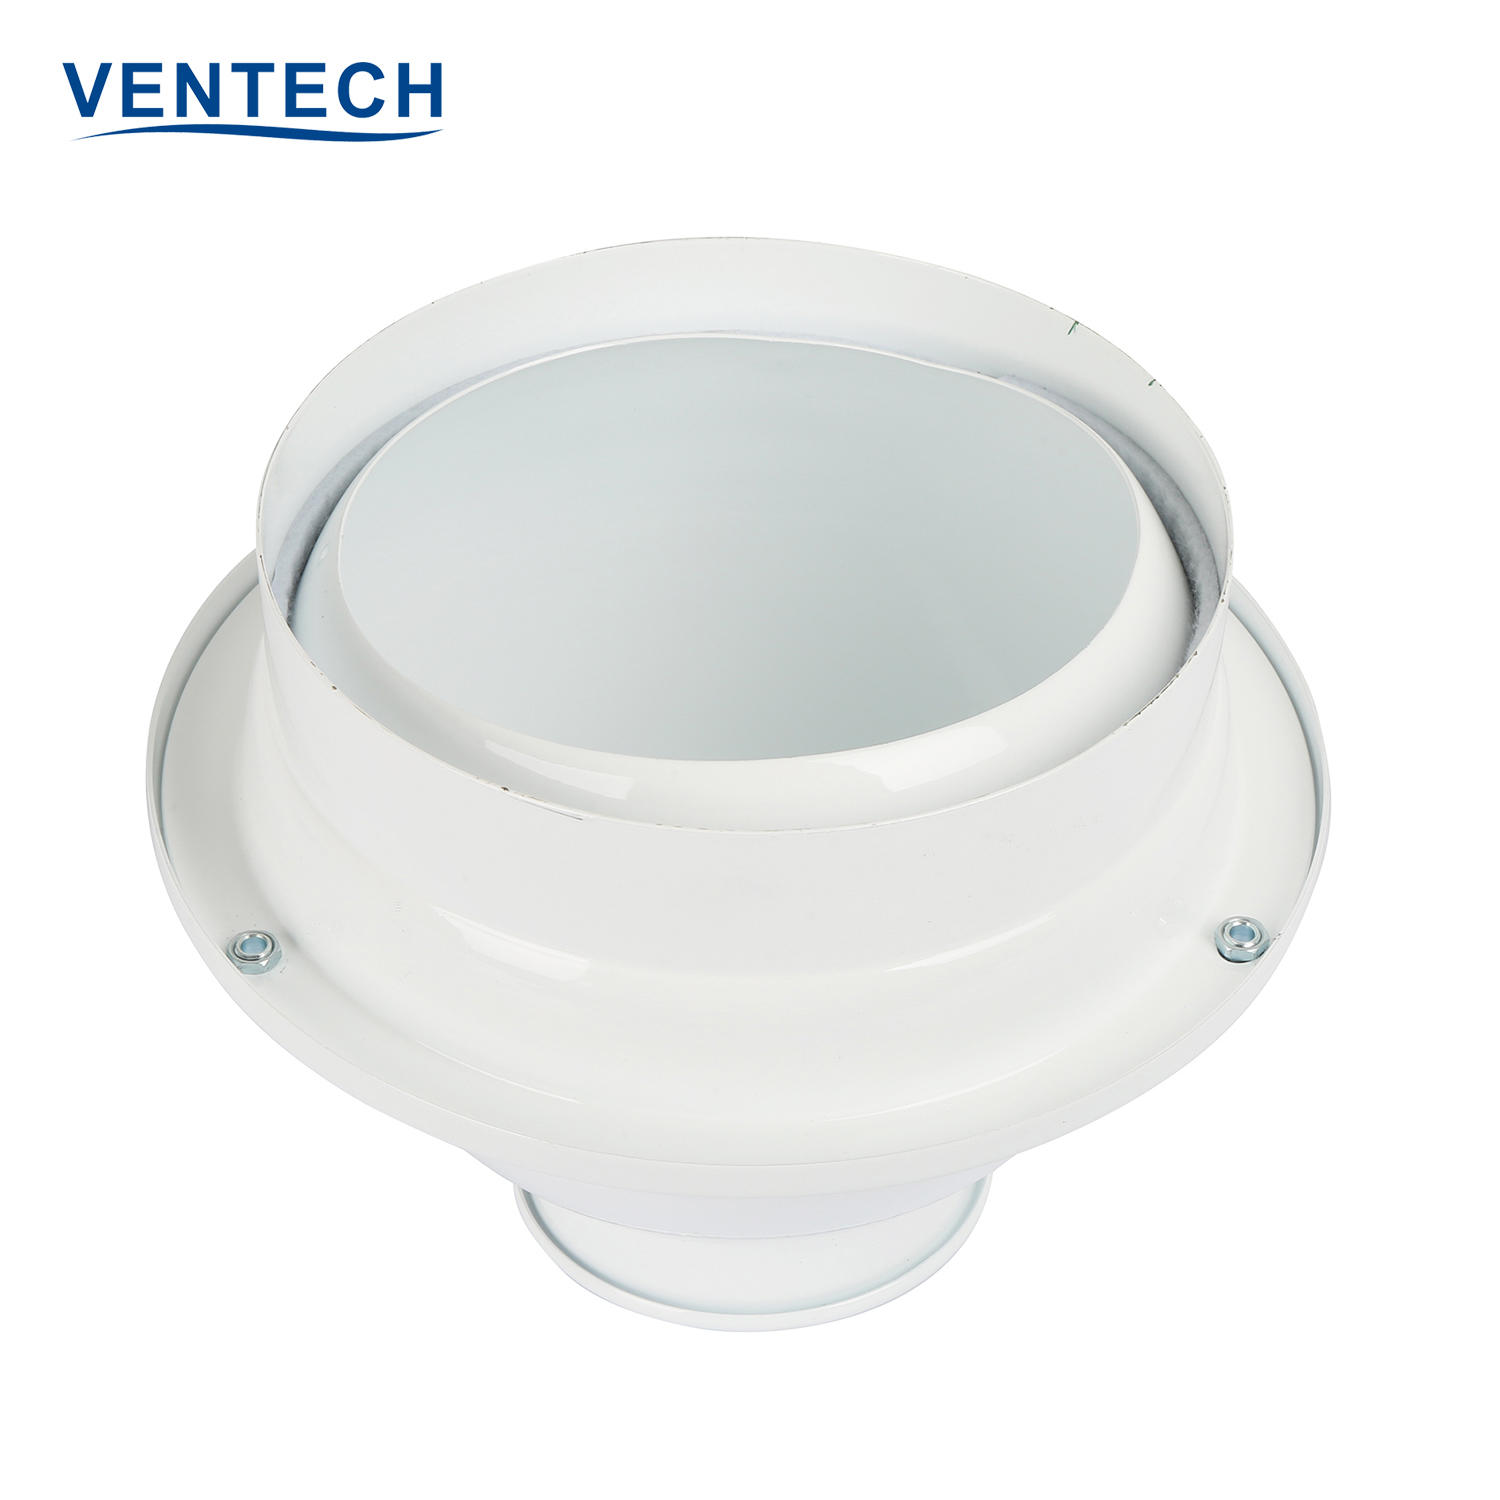 Hvac Ventilation Spherical Ceiling Diffusers Supply Air Adjustable Jet Nozzle Air Conditioning Round Ball Spout Diffusers